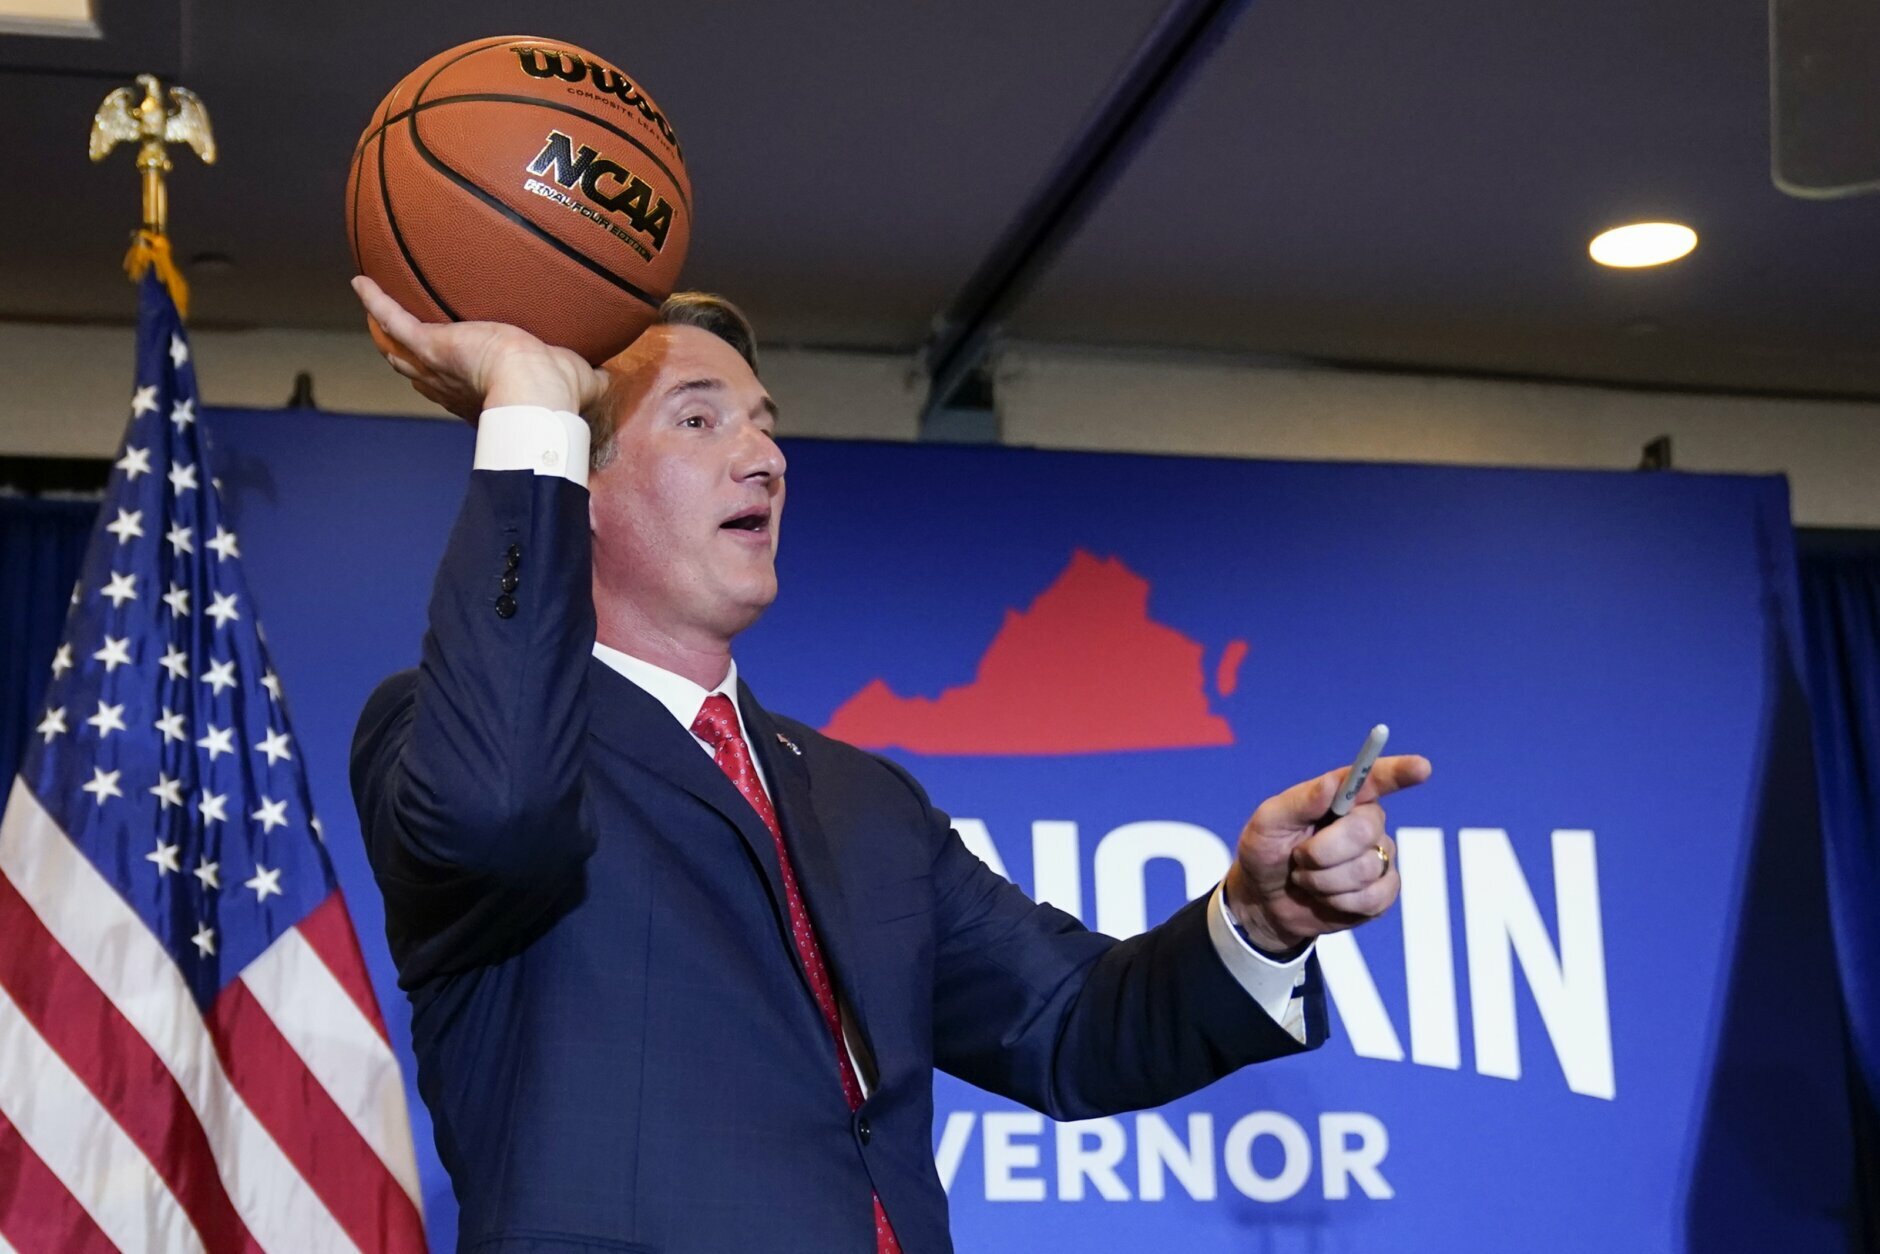 <h3>GOP sweep</h3>
<p>Come January, there will be a Republican in the Virginia governor&#8217;s mansion for the first time in nearly a decade.</p>
<p>Virginia has shifted blue in presidential elections, but Glenn Youngkin&#8217;s November victory — plus the GOP sweep of other statewide offices and the retaking of the House of Delegates — was a reminder the commonwealth mostly sticks to its pattern of electing the out party the year after.</p>
<p>Youngkin, the former CEO of the Carlyle Group investment firm, was credited with running a savvy campaign that attracted both supporters of former President Donald Trump as well as more moderate voters who had abandoned the GOP with Trump as its standard-bearer.</p>
<p>Youngkin <a href="https://wtop.com/virginia/2021/11/youngkin-victory-shows-winning-gop-path-on-education/">made education a theme during the campaign</a>, spotlighting culture war fights over how schools teach race and other topics — one of his slogans was &#8220;Parents matter.&#8221;</p>
<p>The Republican victories down-ticket were history-making in other ways.</p>
<p>In addition to newcomer Youngkin&#8217;s victory over former Democratic Gov. Terry McAuliffe, <a href="https://wtop.com/virginia/2021/11/virginias-down-ballot-democrats-slightly-trailing-gop/" target="_blank" rel="noopener">Winsome Sears defeated Democrat Hala Ayala for lieutenant governor</a>, becoming the first woman and first Black woman elected to statewide office in Virginia.</p>
<p>Republican Jason Miyares defeated Democratic incumbent Mark Herring, becoming the first Latino elected to statewide office in Virginia.</p>
<p>In the General Assembly, Republicans toppled just enough Democrats to retake control of the House — two years after Dems won unified control in Richmond and pushed forward on a series of major moves, including gun safety measures, legalizing marijuana, ending the death penalty and expanding Medicaid.</p>
<p>Democrats maintain their hold on the state Senate, meaning developments in Richmond could get interesting in the months ahead.</p>
<p><em>The Associated Press contributed to this report. </em></p>
